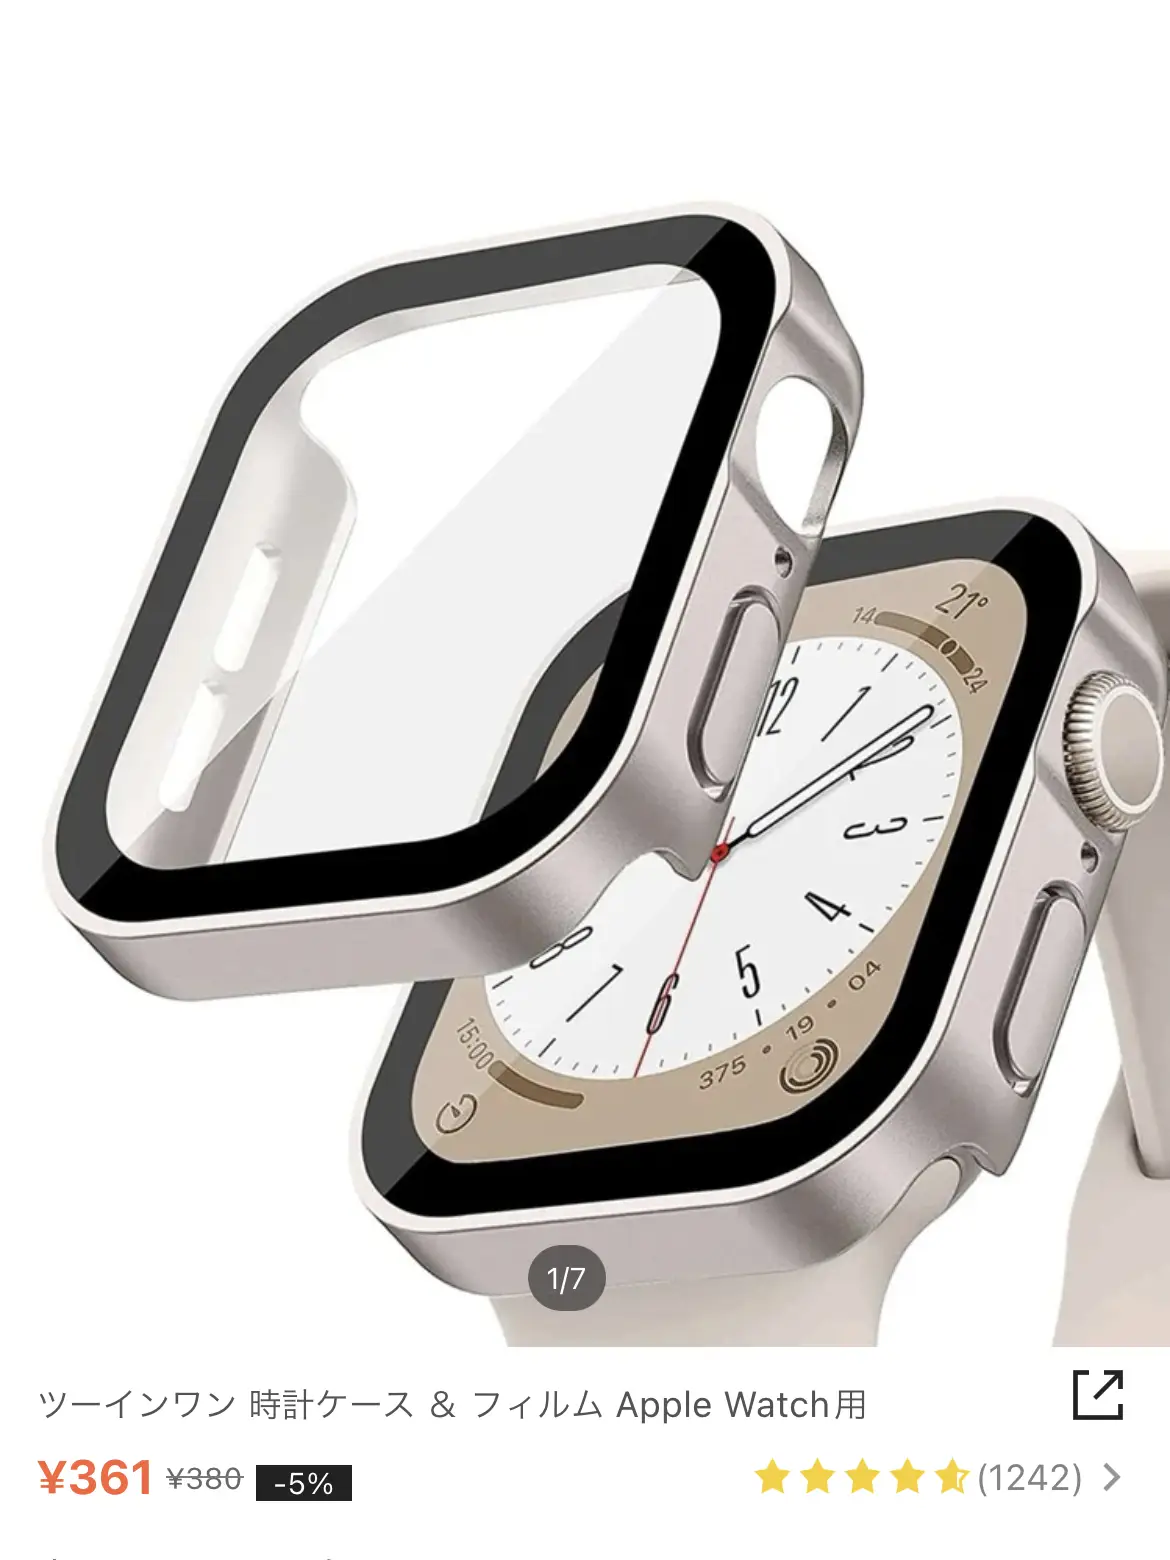 SHEIN purchase Applewatch band body cover | Gallery posted by まみ